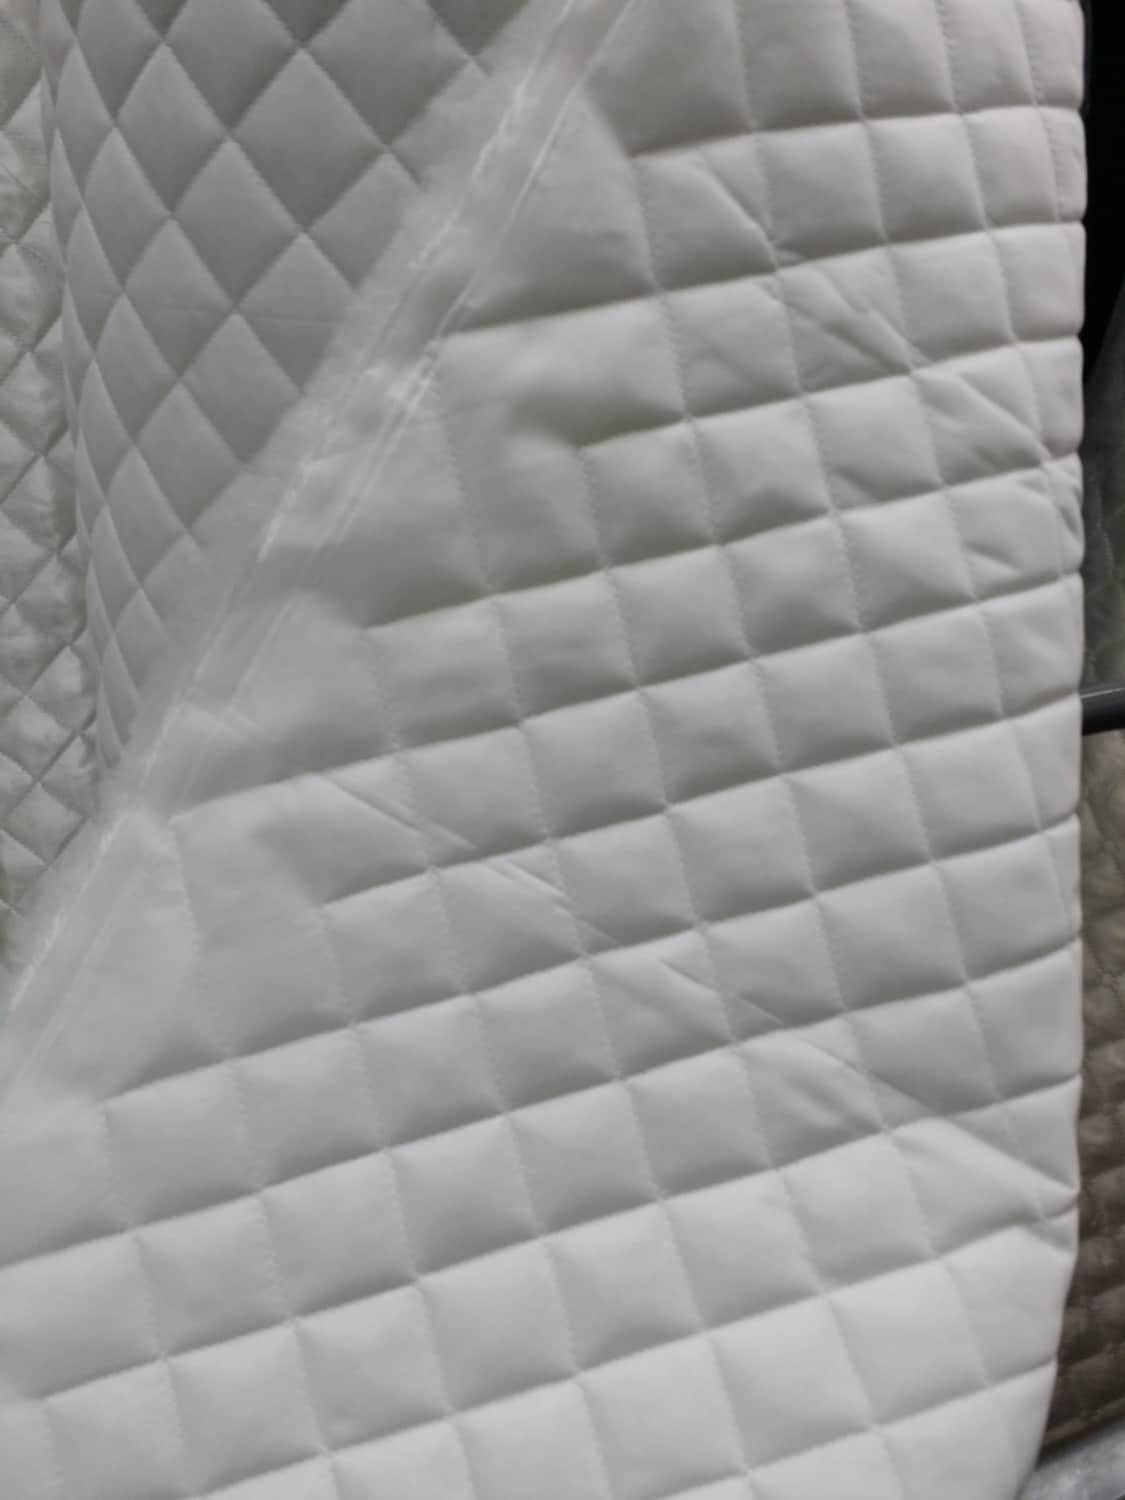 Quilted Polyester Batting Fabric BLACK 58/60 Width Sold by the Yard 